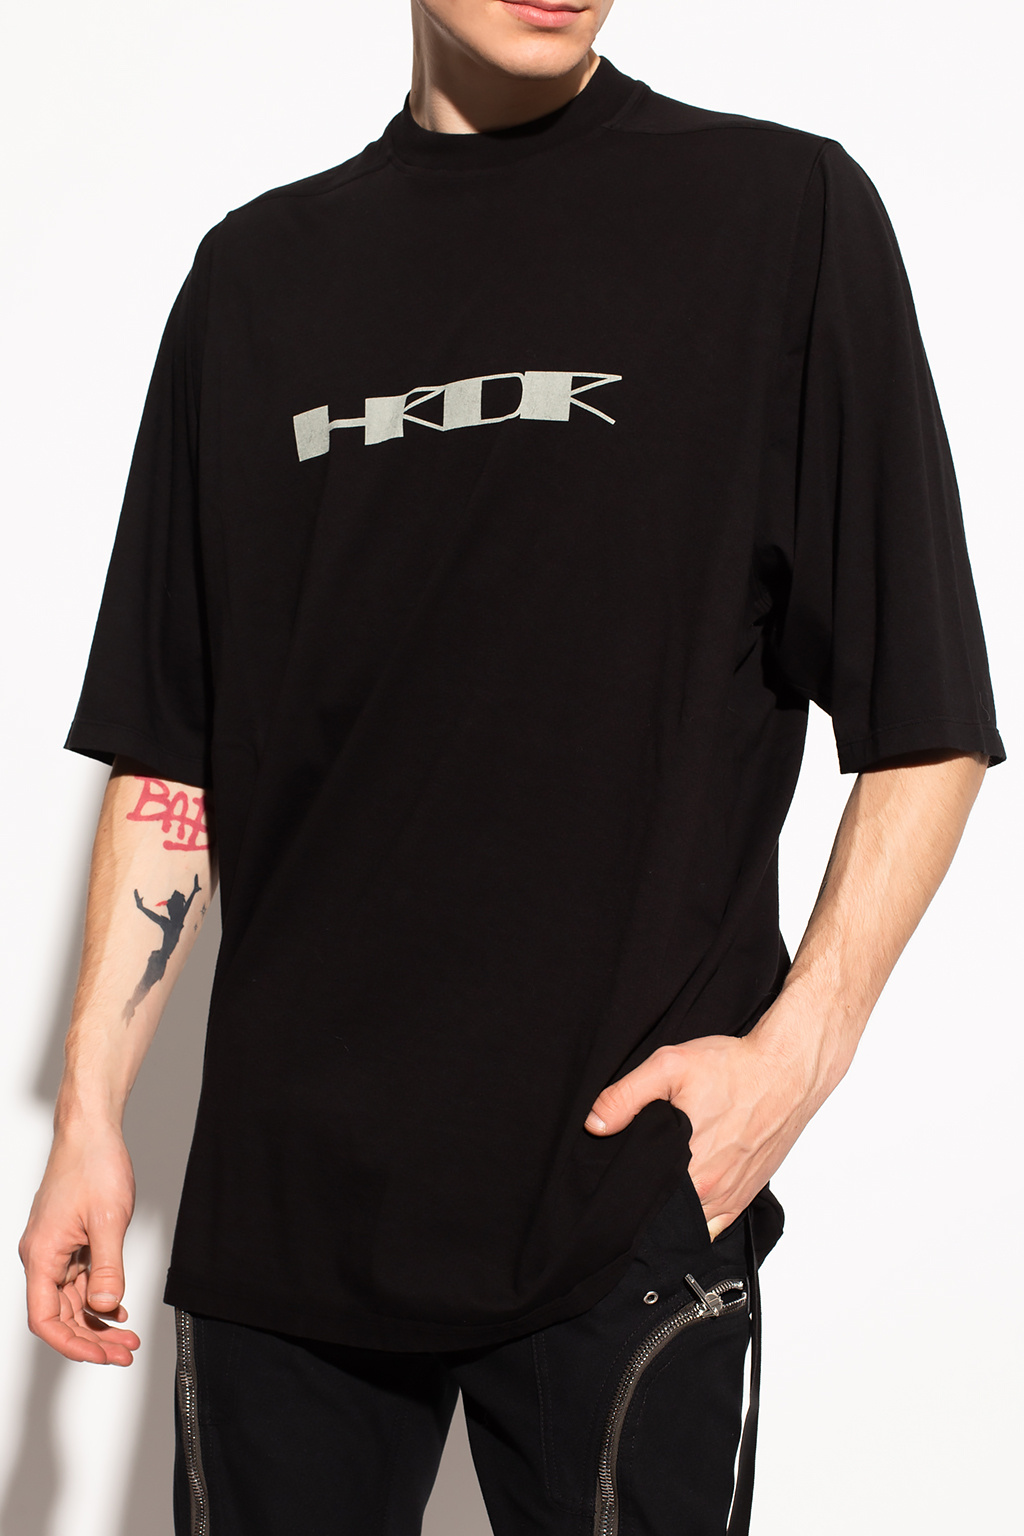 Hurley One and Only small box t-shirt in black Printed T-shirt